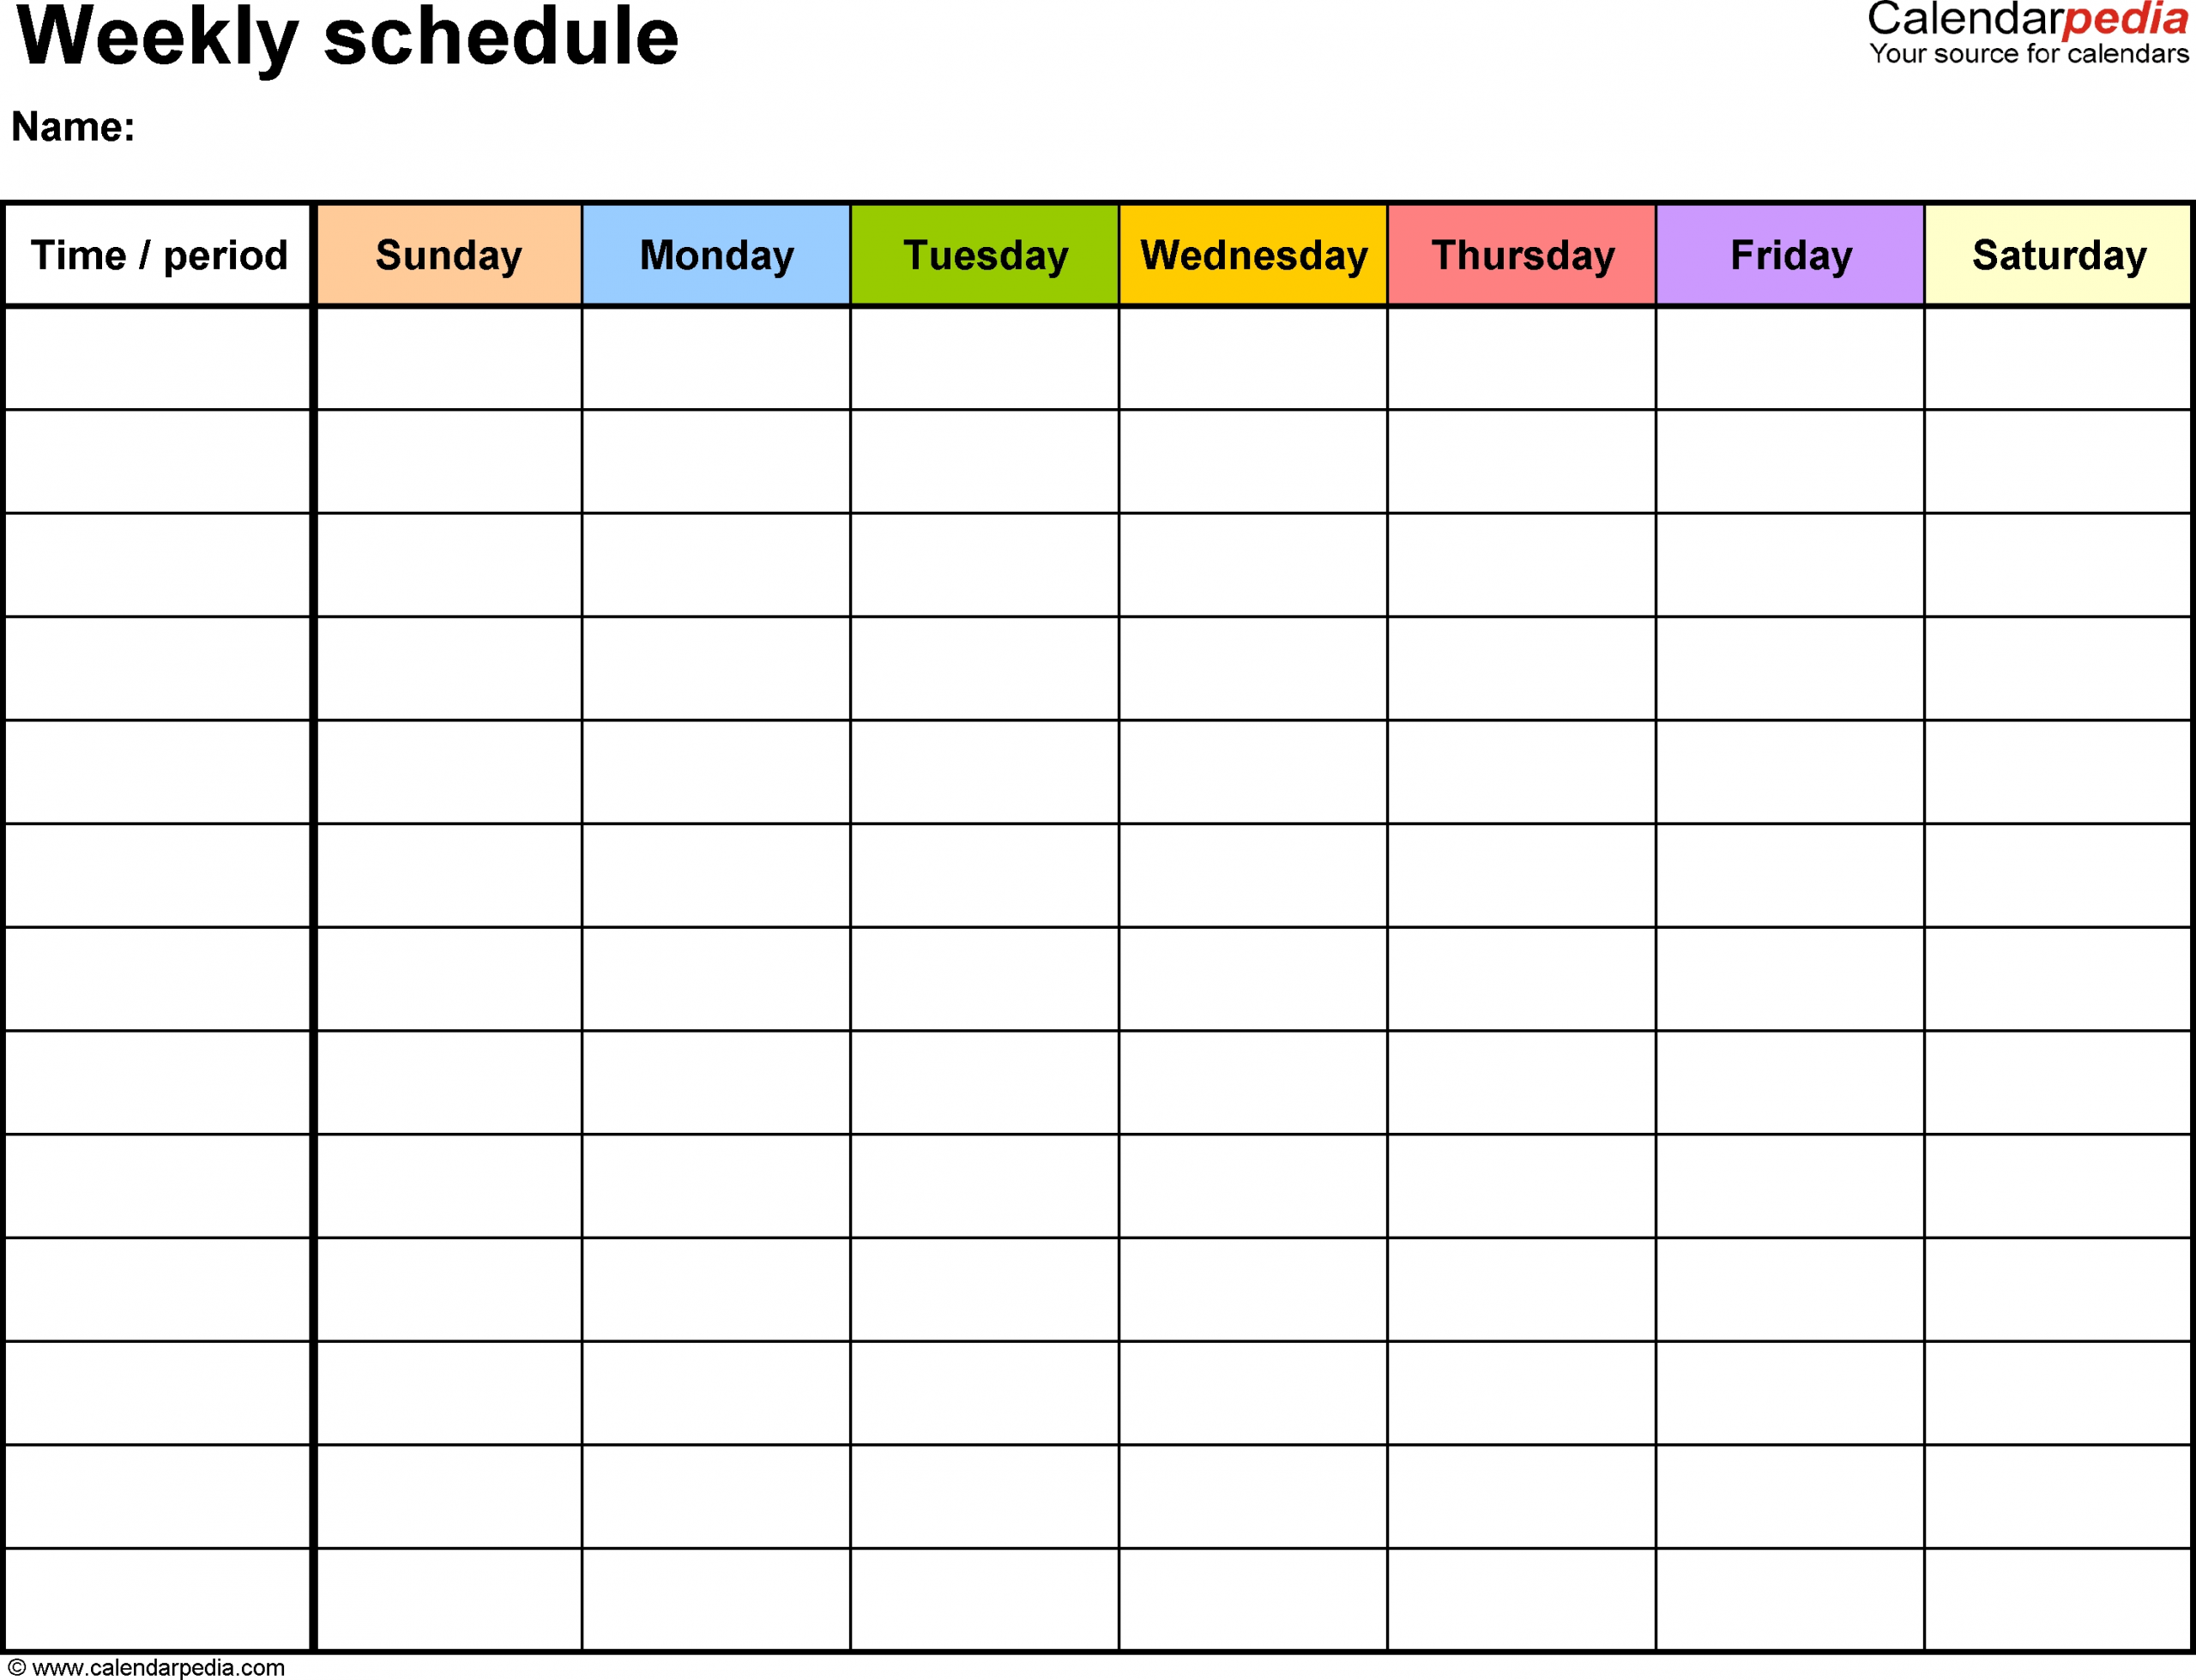 Free Weekly Schedule Templates For Word - 18 Templates Calendar Template Saturday Start